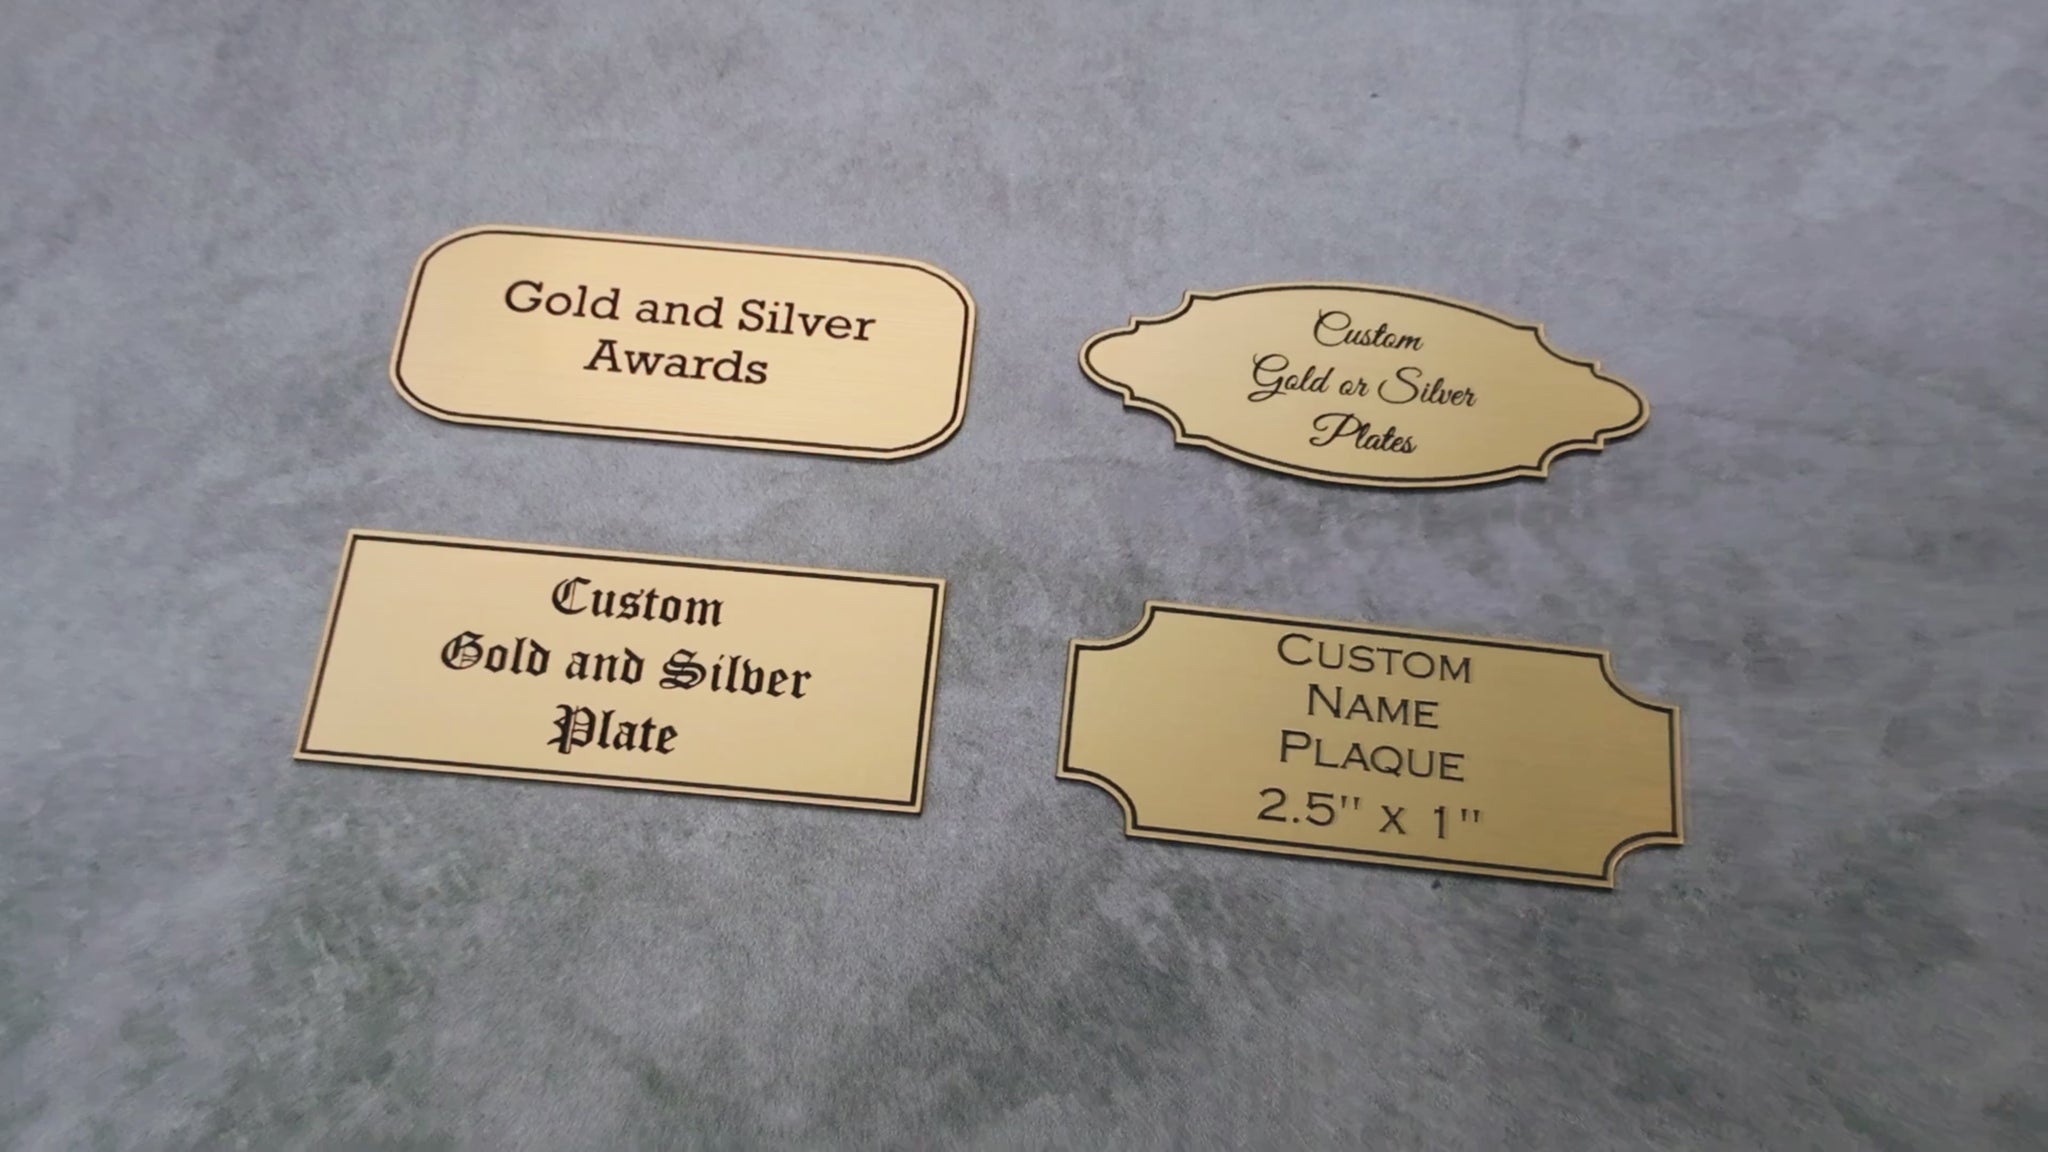 gold plate engraved flexibrass adhesive weatherproof custom metal label personalized plaque museum art awards tags name tag recognition labels pet loss label brass interior gold plaque silver plaque custom collection army memorial